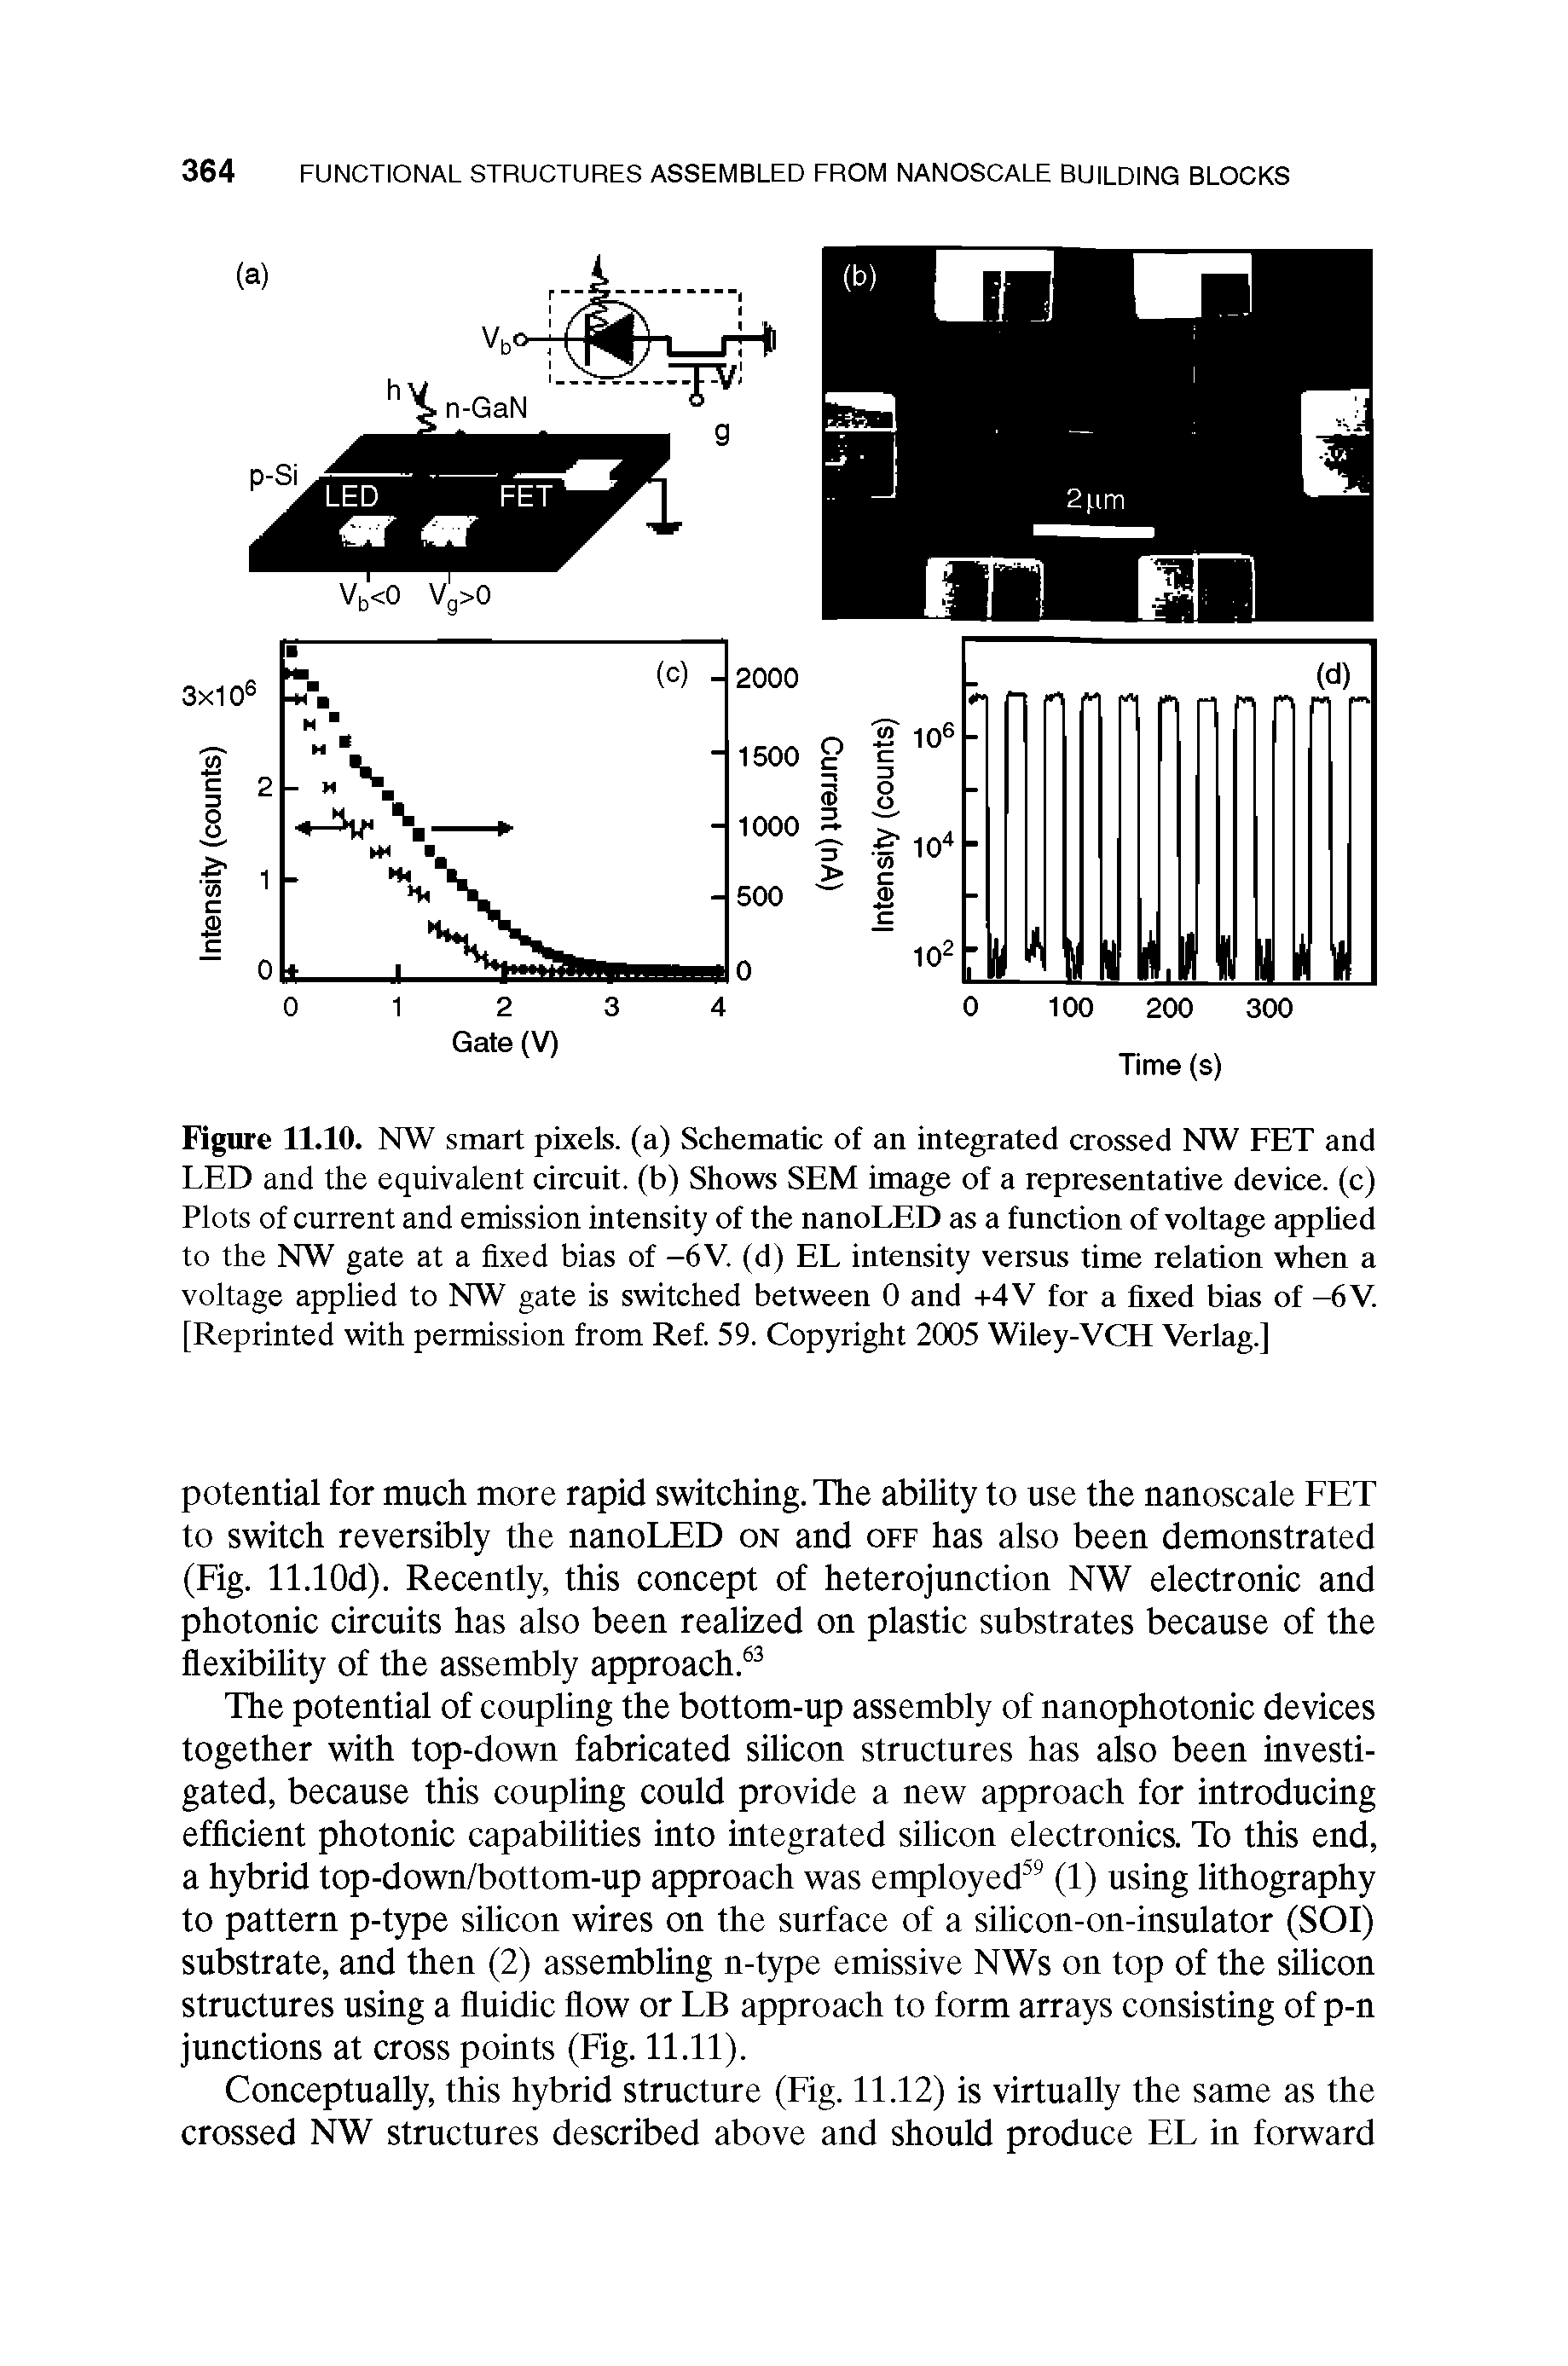 Figure 11.10. NW smart pixels, (a) Schematic of an integrated crossed NW FET and LED and the equivalent circuit, (b) Shows SEM image of a representative device, (c) Plots of current and emission intensity of the nanoLED as a function of voltage apphed to the NW gate at a fixed bias of -6V. (d) EL intensity versus time relation when a voltage applied to NW gate is switched between 0 and +4V for a fixed bias of -6V. [Reprinted with permission from Ref. 59. Copyright 2005 Wiley-VCH Verlag.]...